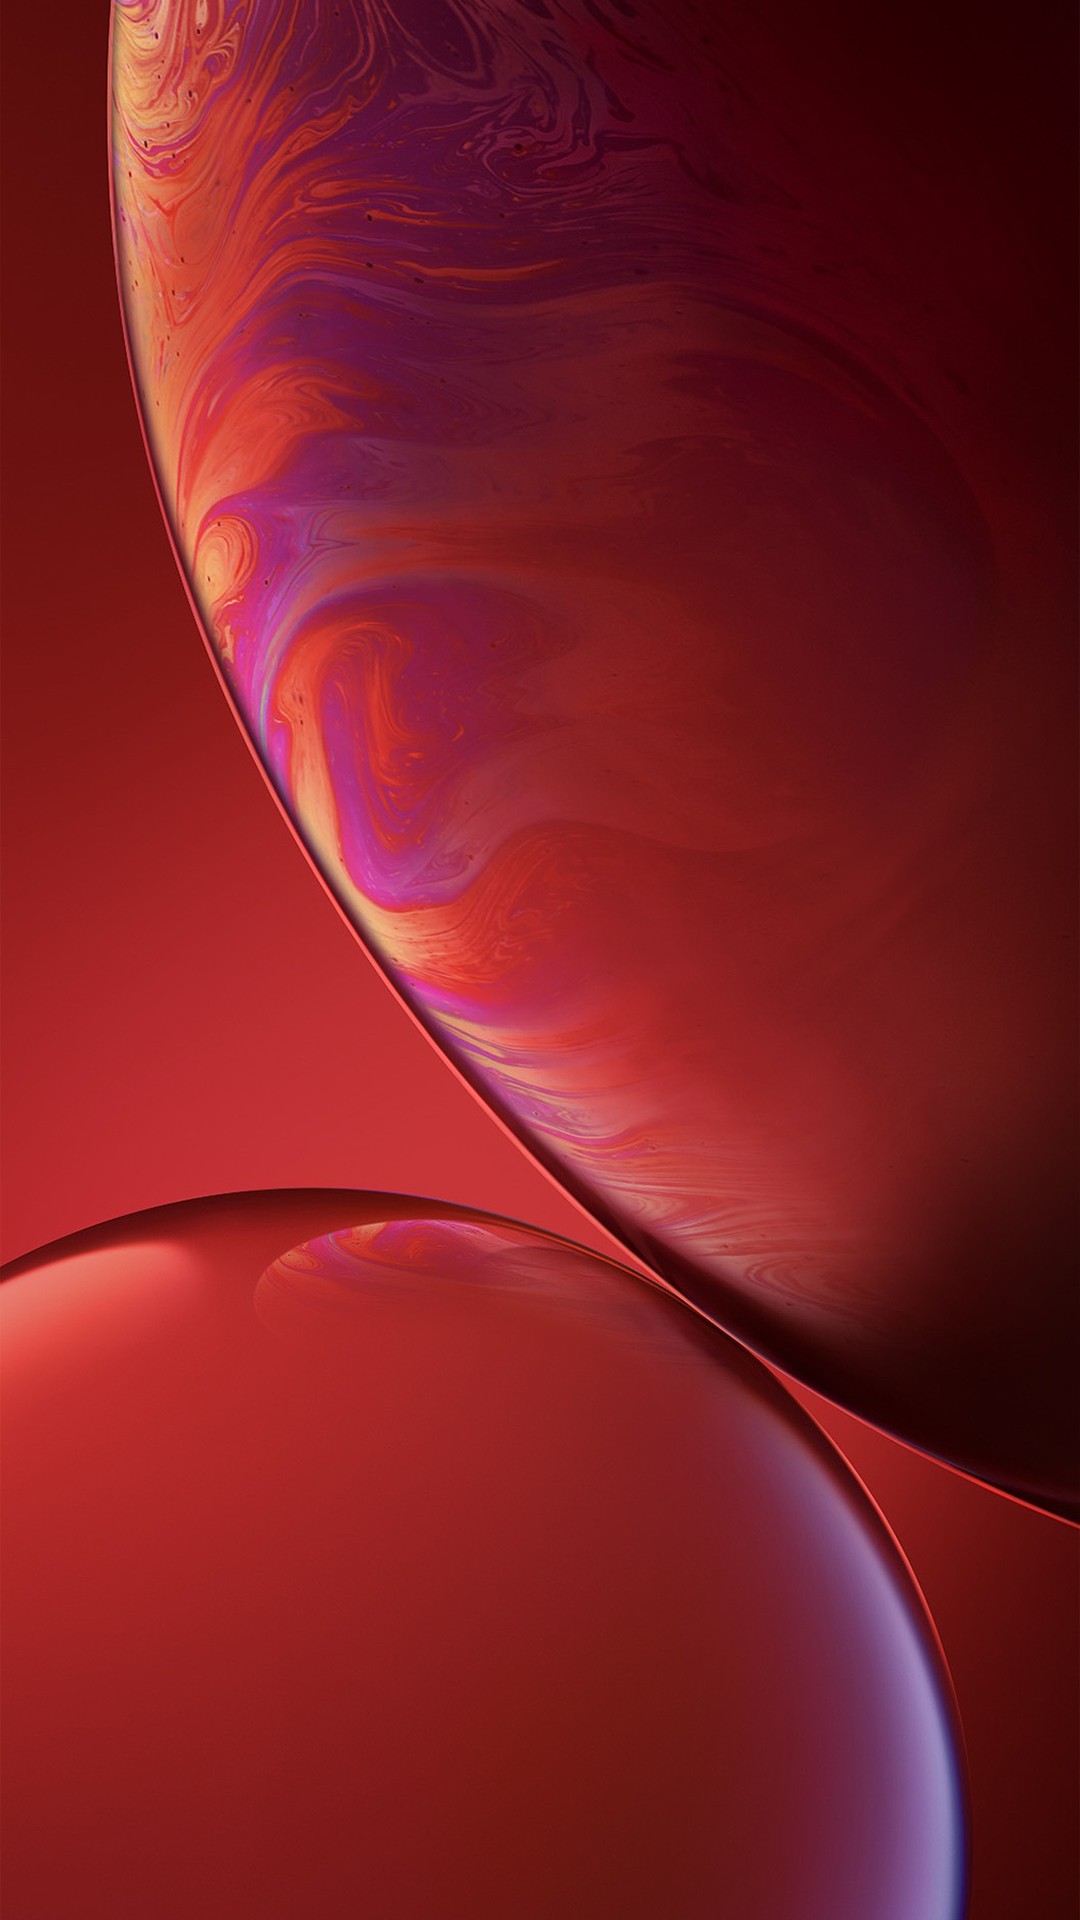 iPhone XS and iPhone XR wallpaper